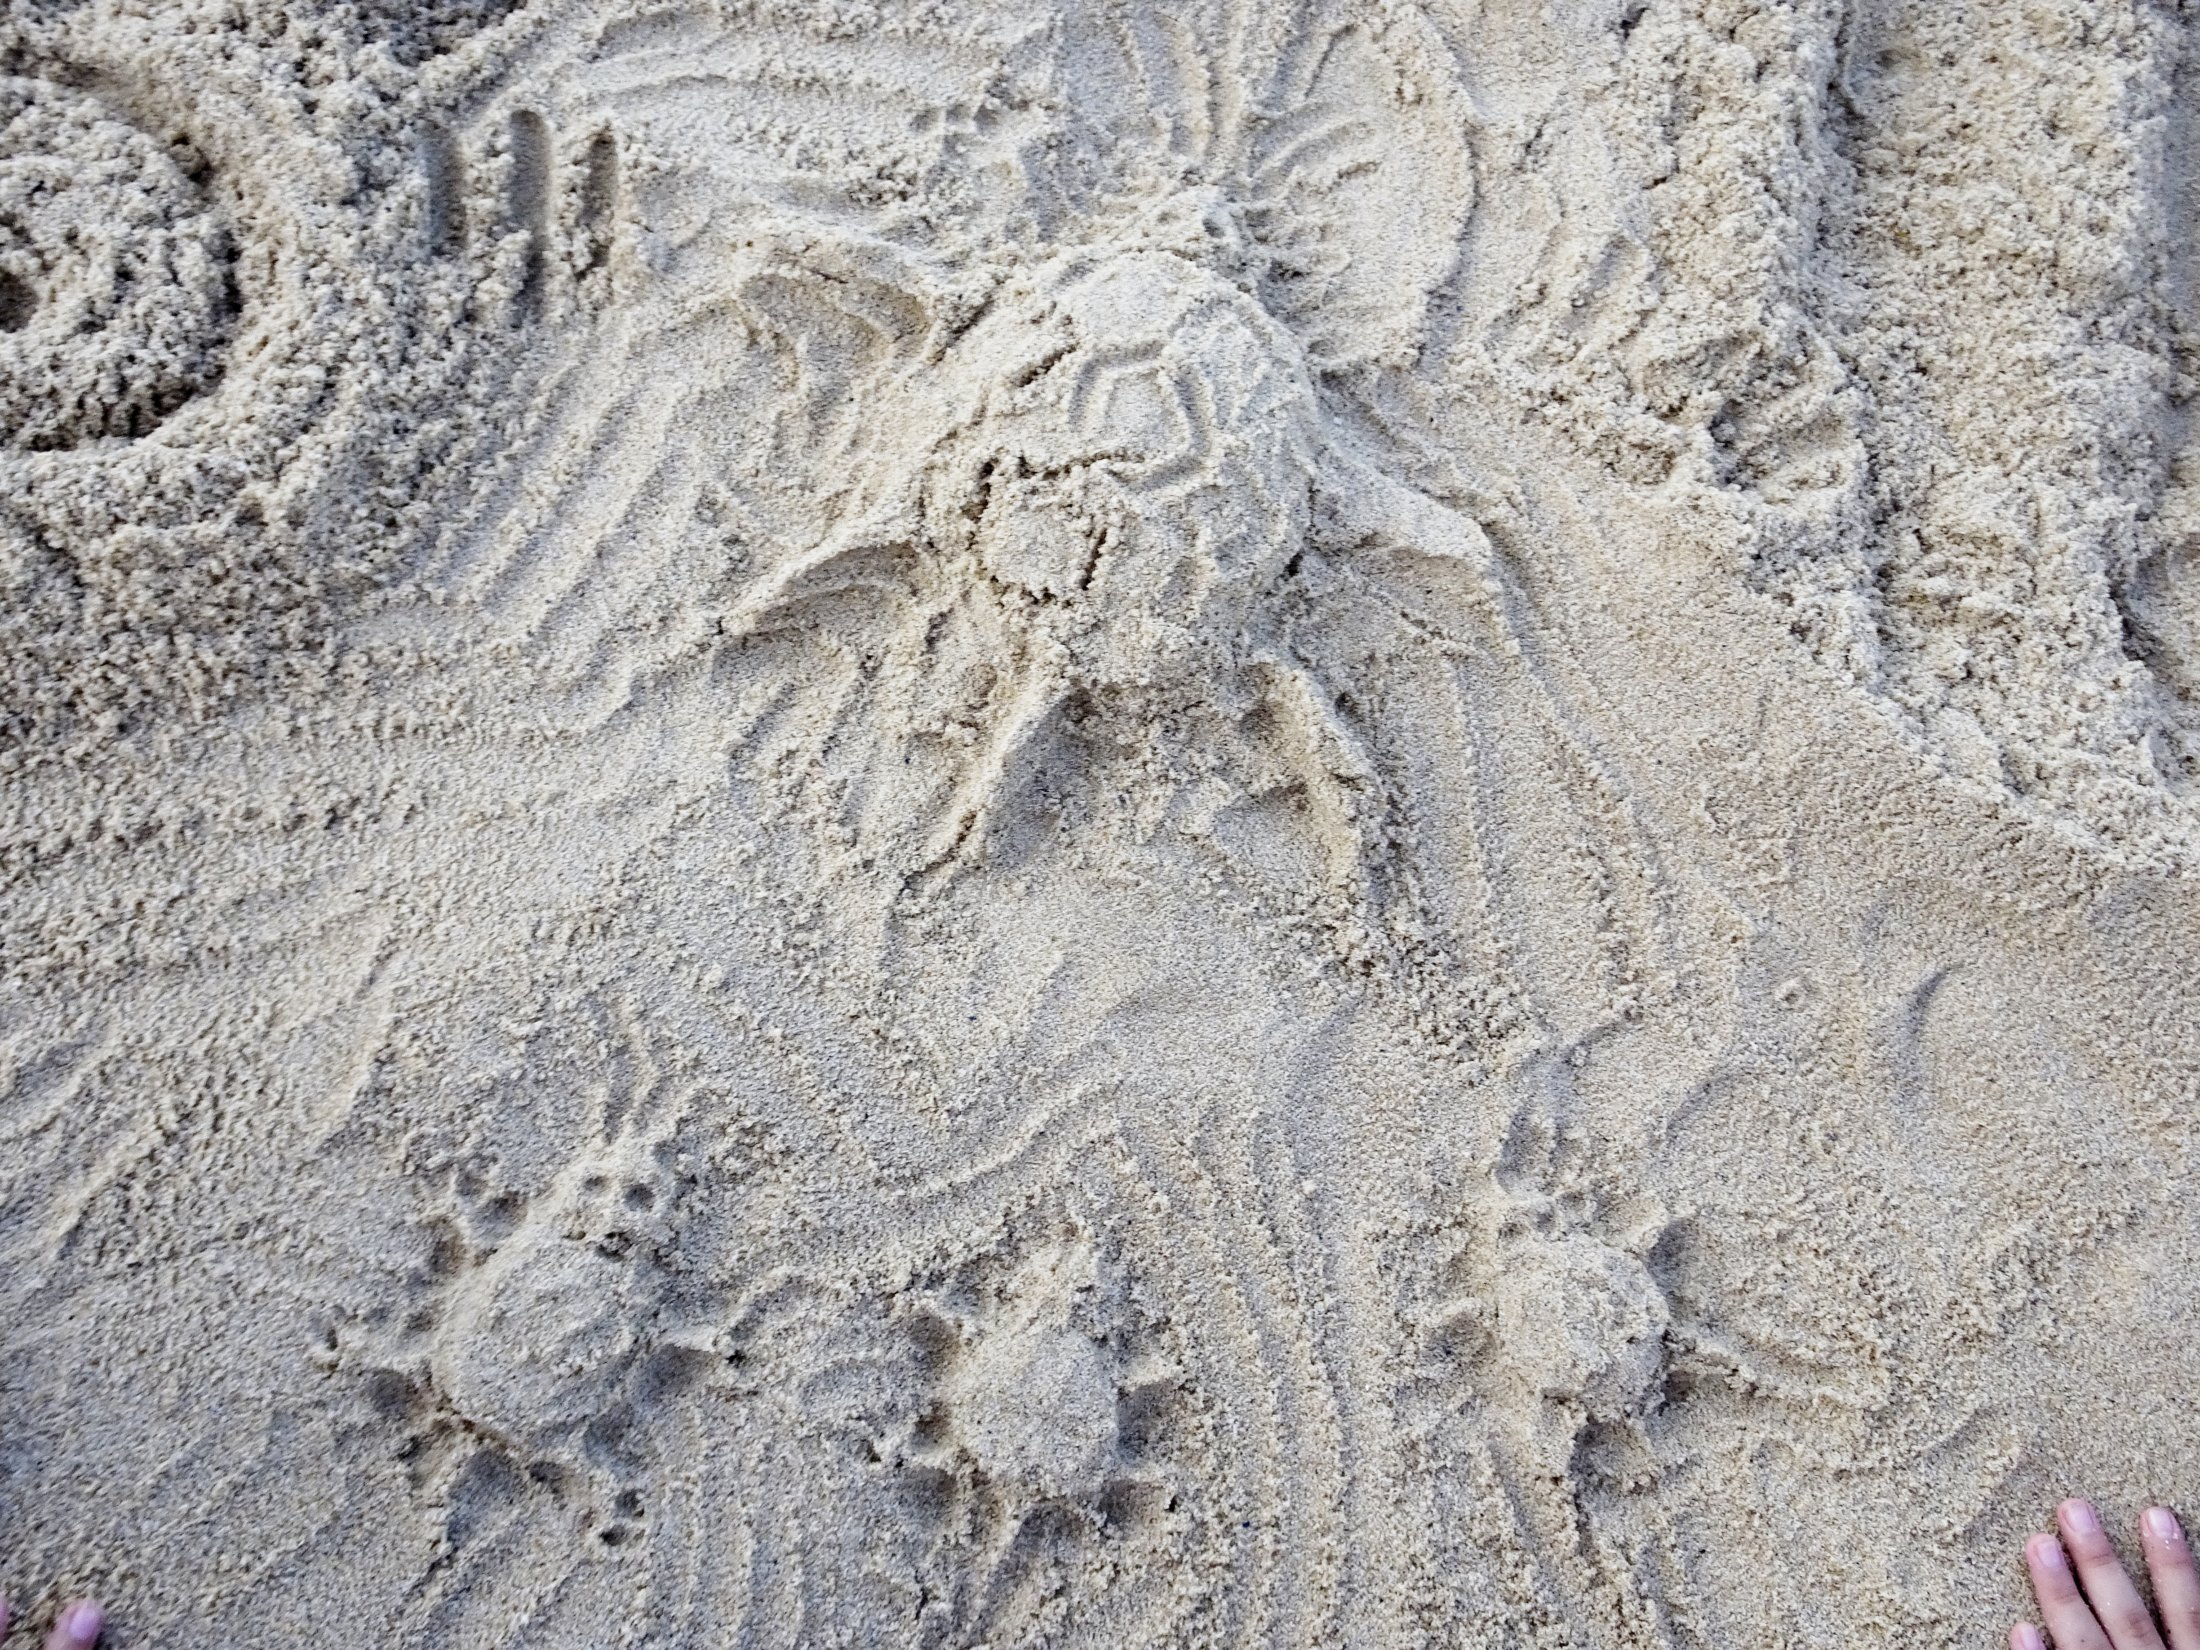 Drawing of marine life in the sand